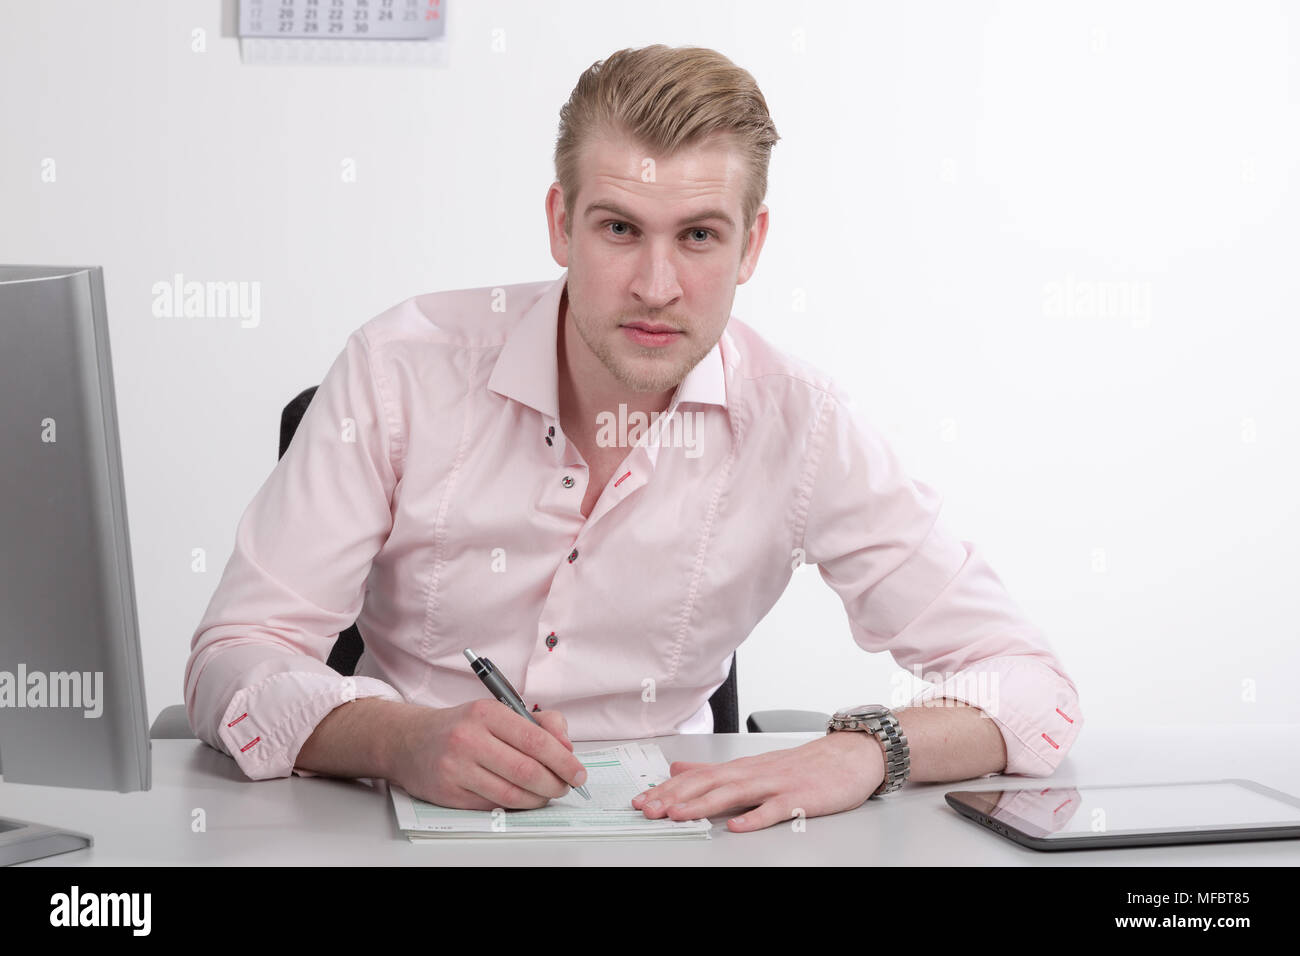 Young man working at desk on paper work Stock Photo